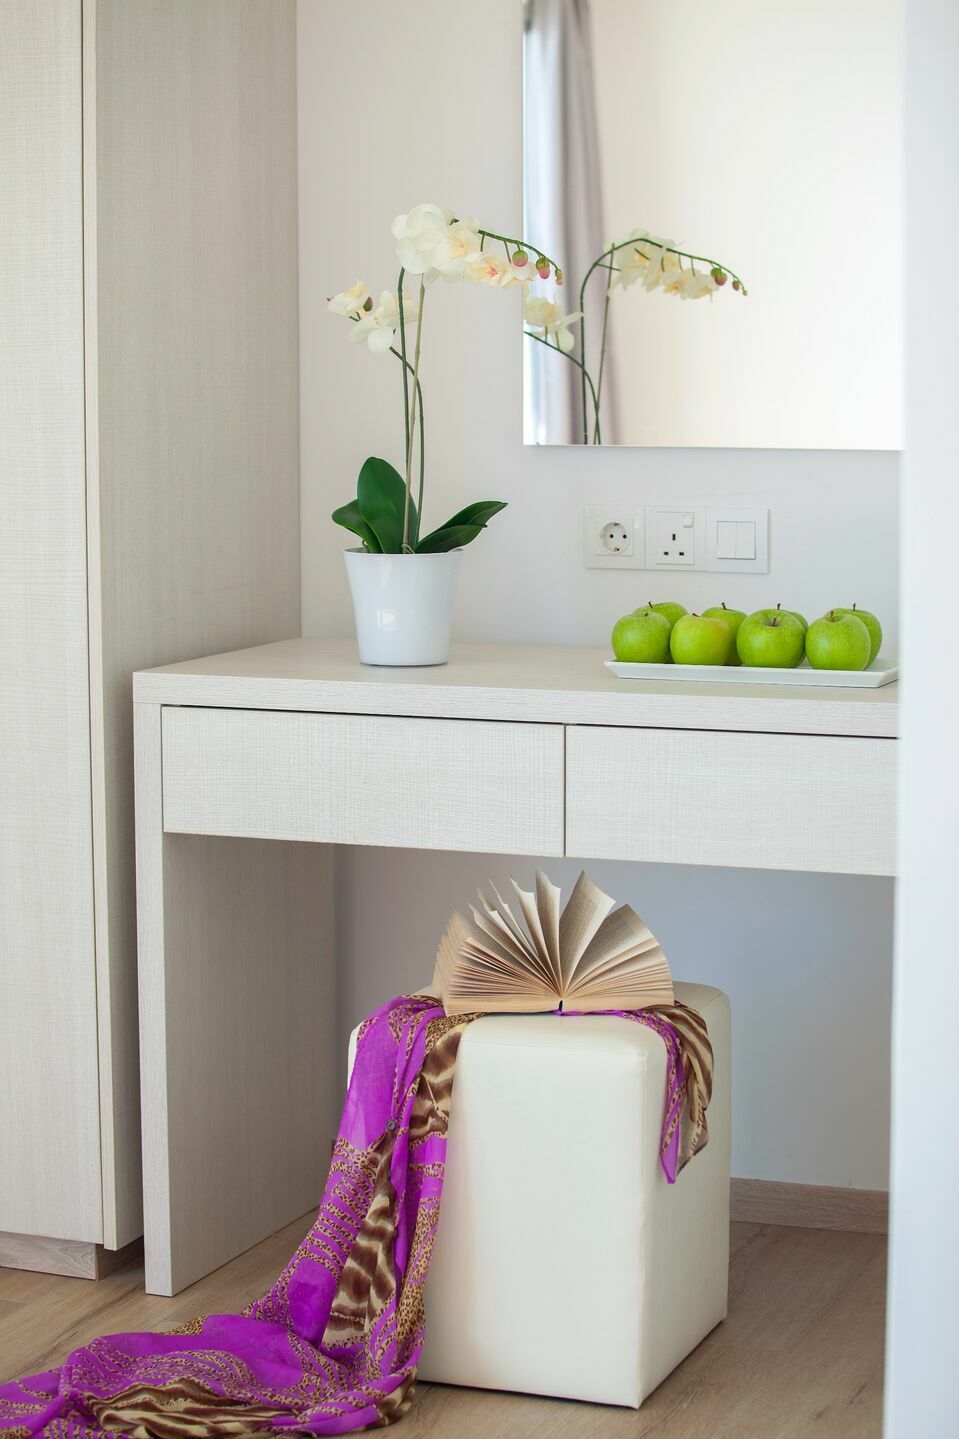 dressing_table